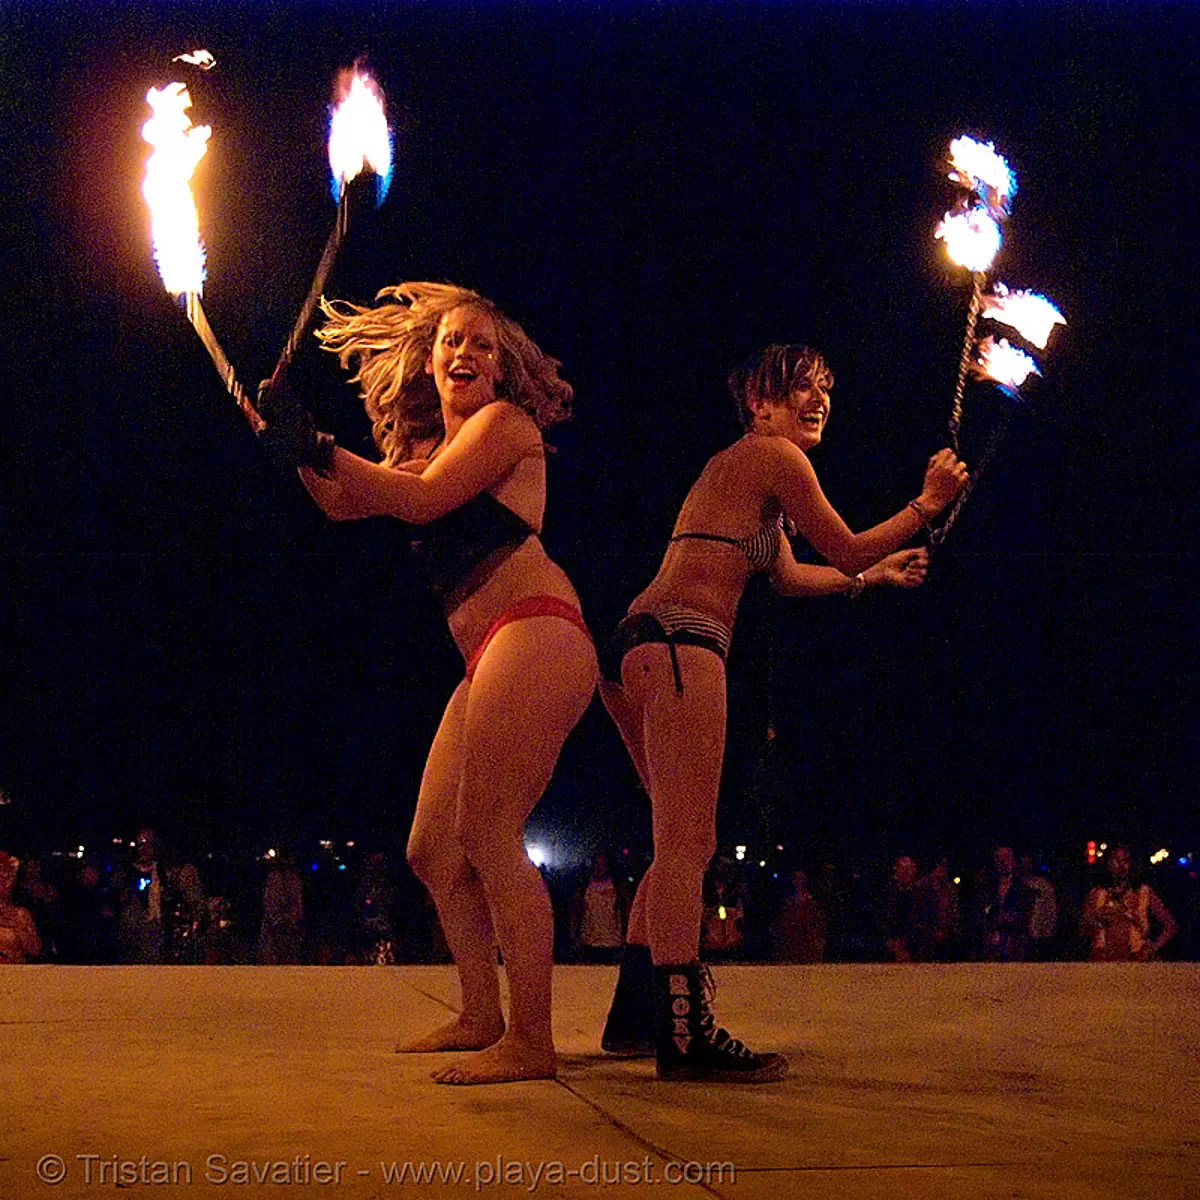 louise and gina, from ireland, spinning fire on the shiva vista stage - burning man 2007, burning man, fire poi, night, shiva vista stage